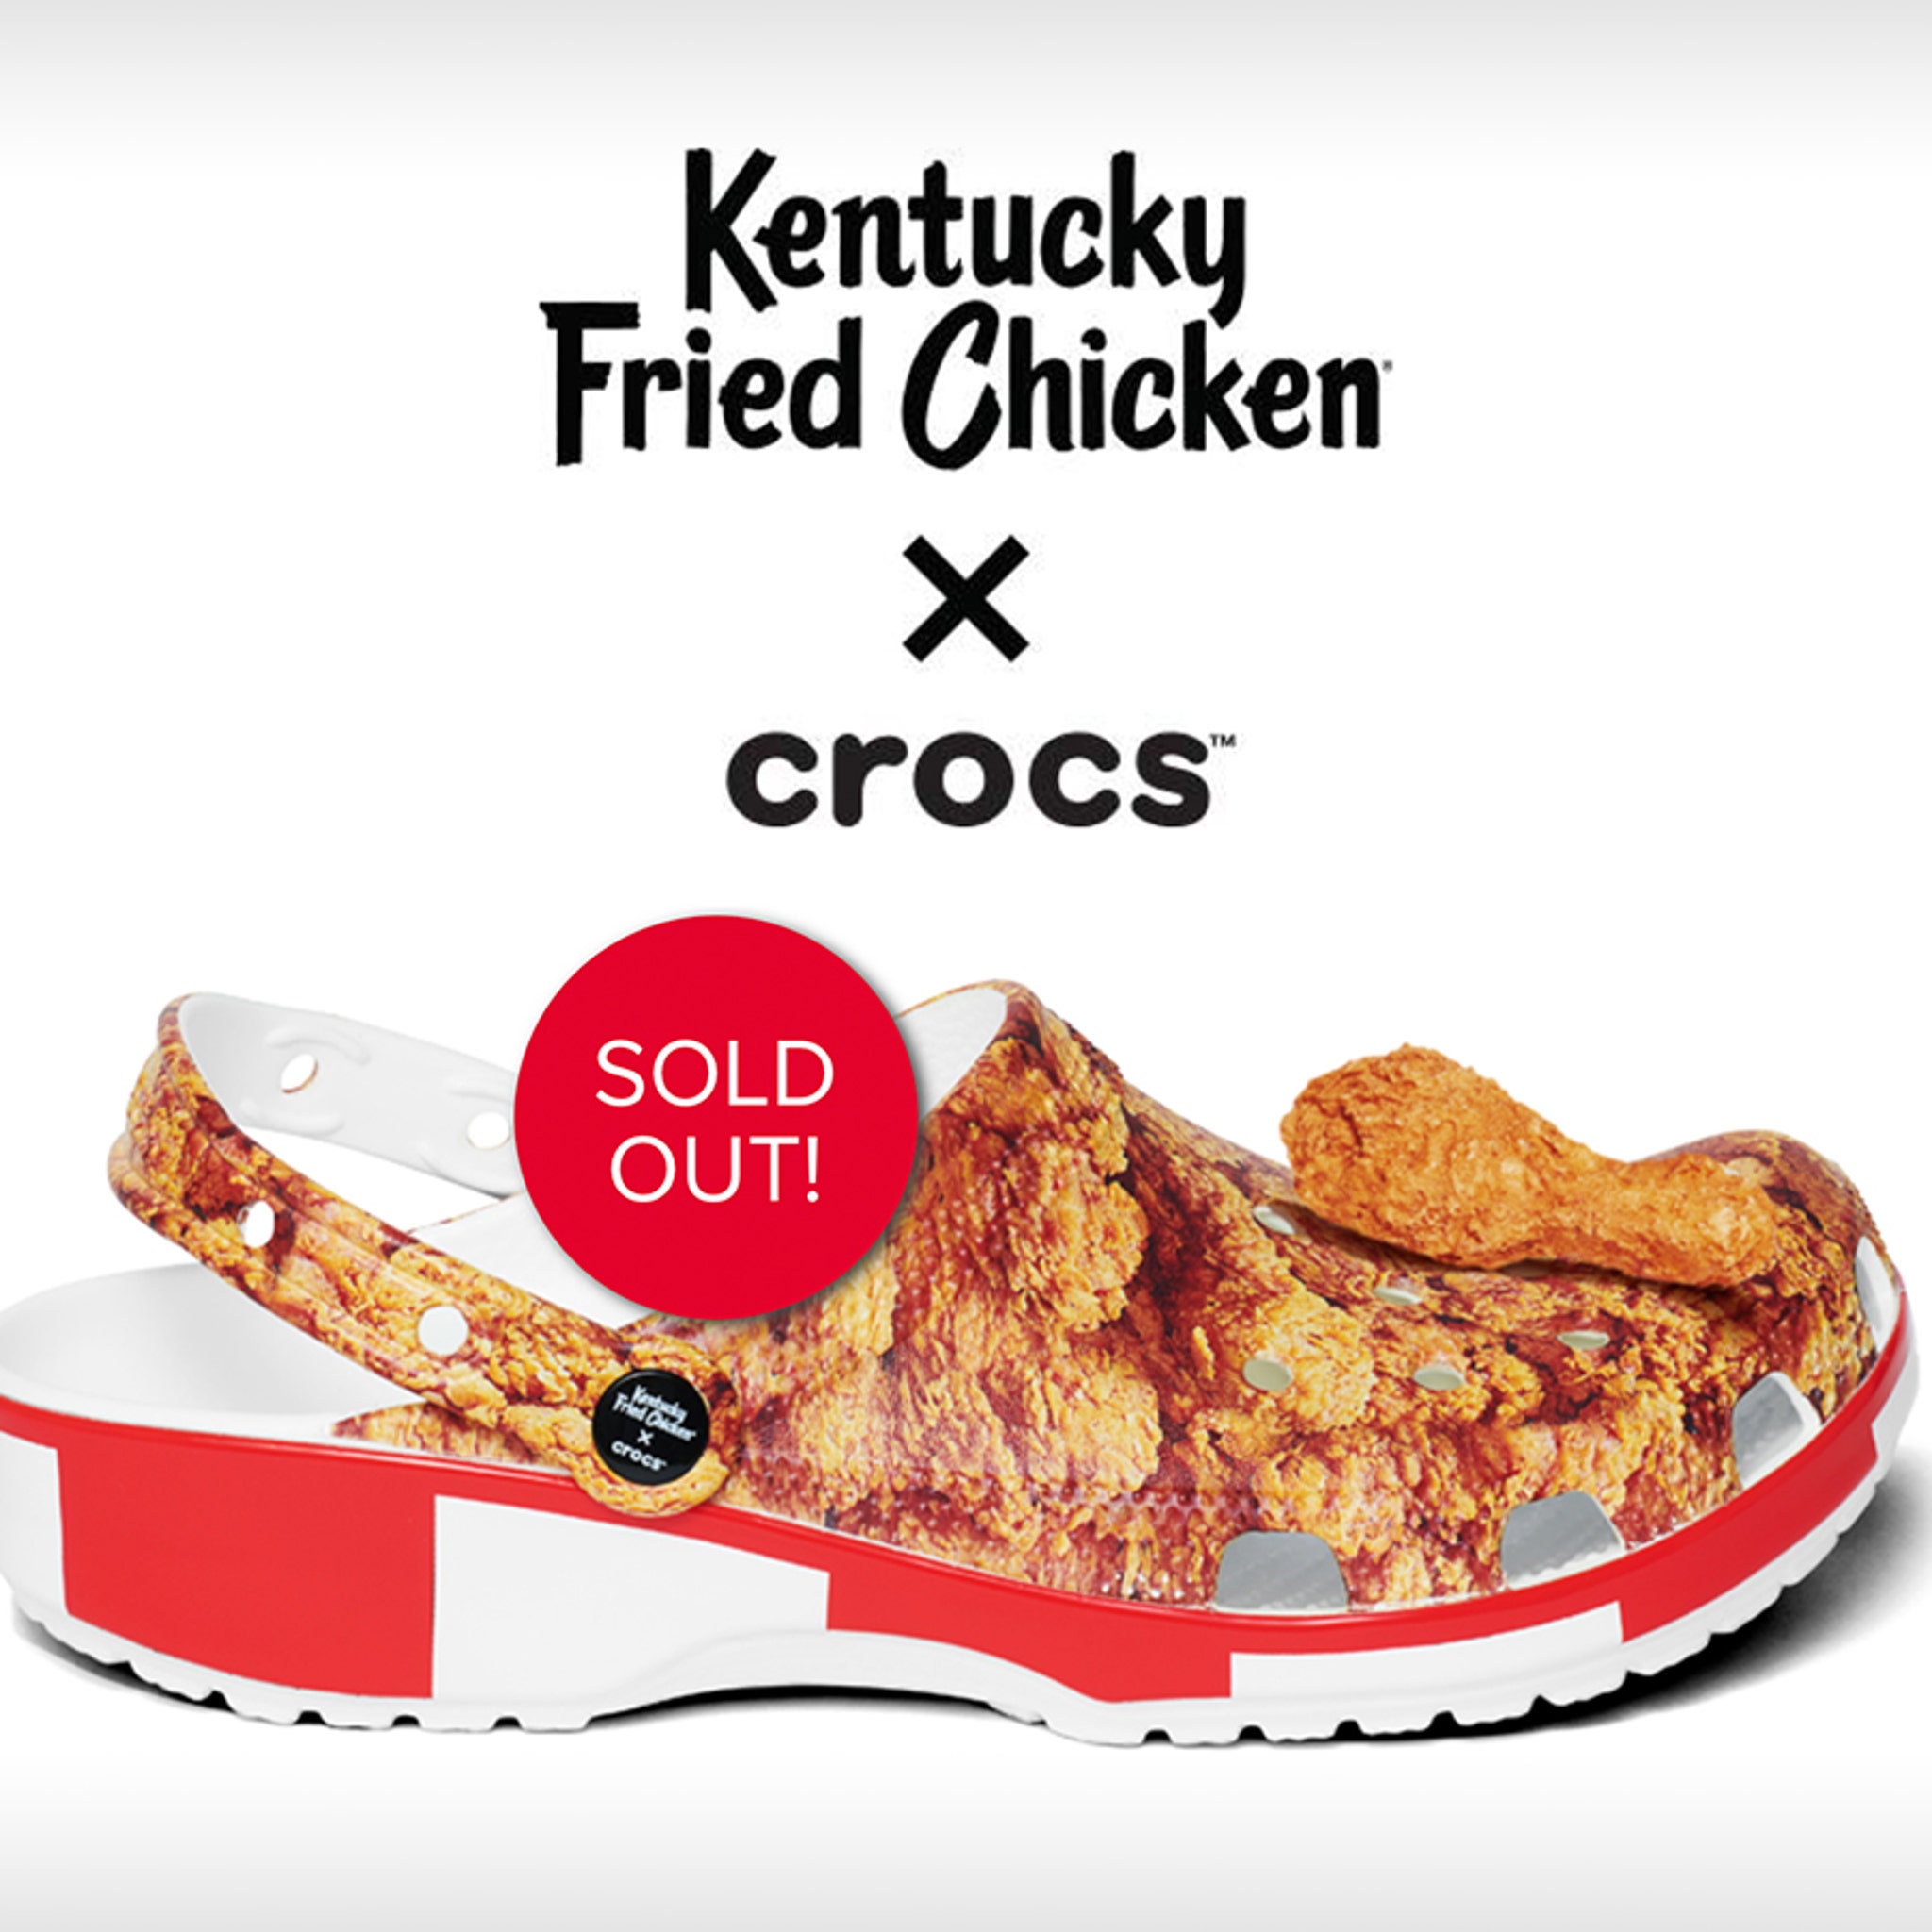 KFC Crocs That Smell Like Fried Chicken Are Sold Out for Some Reason